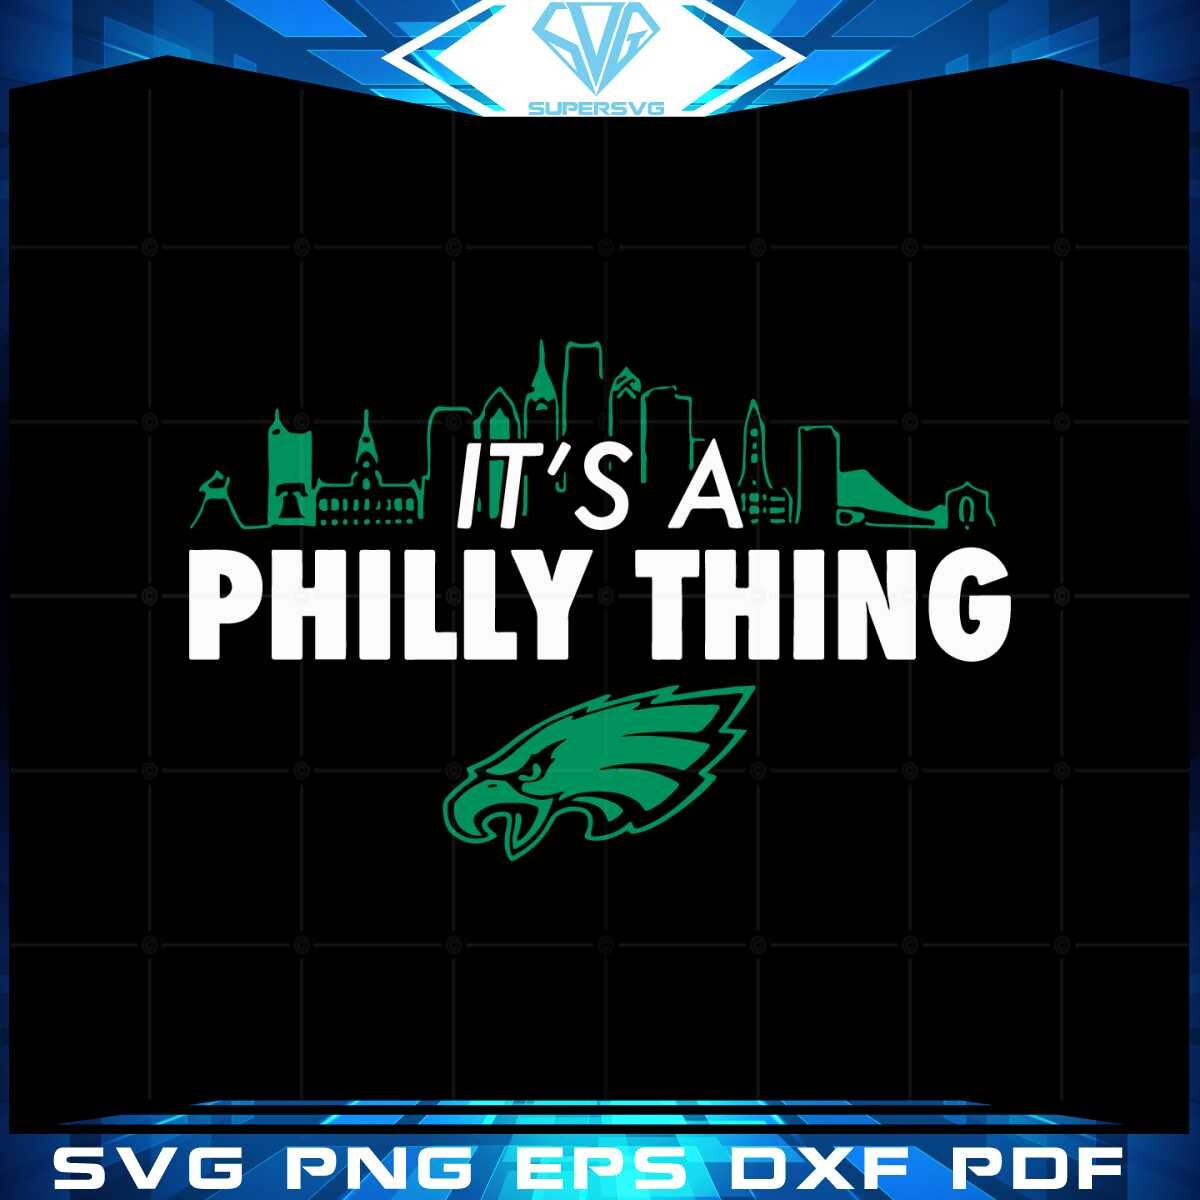 it's a philly thing wallpaper